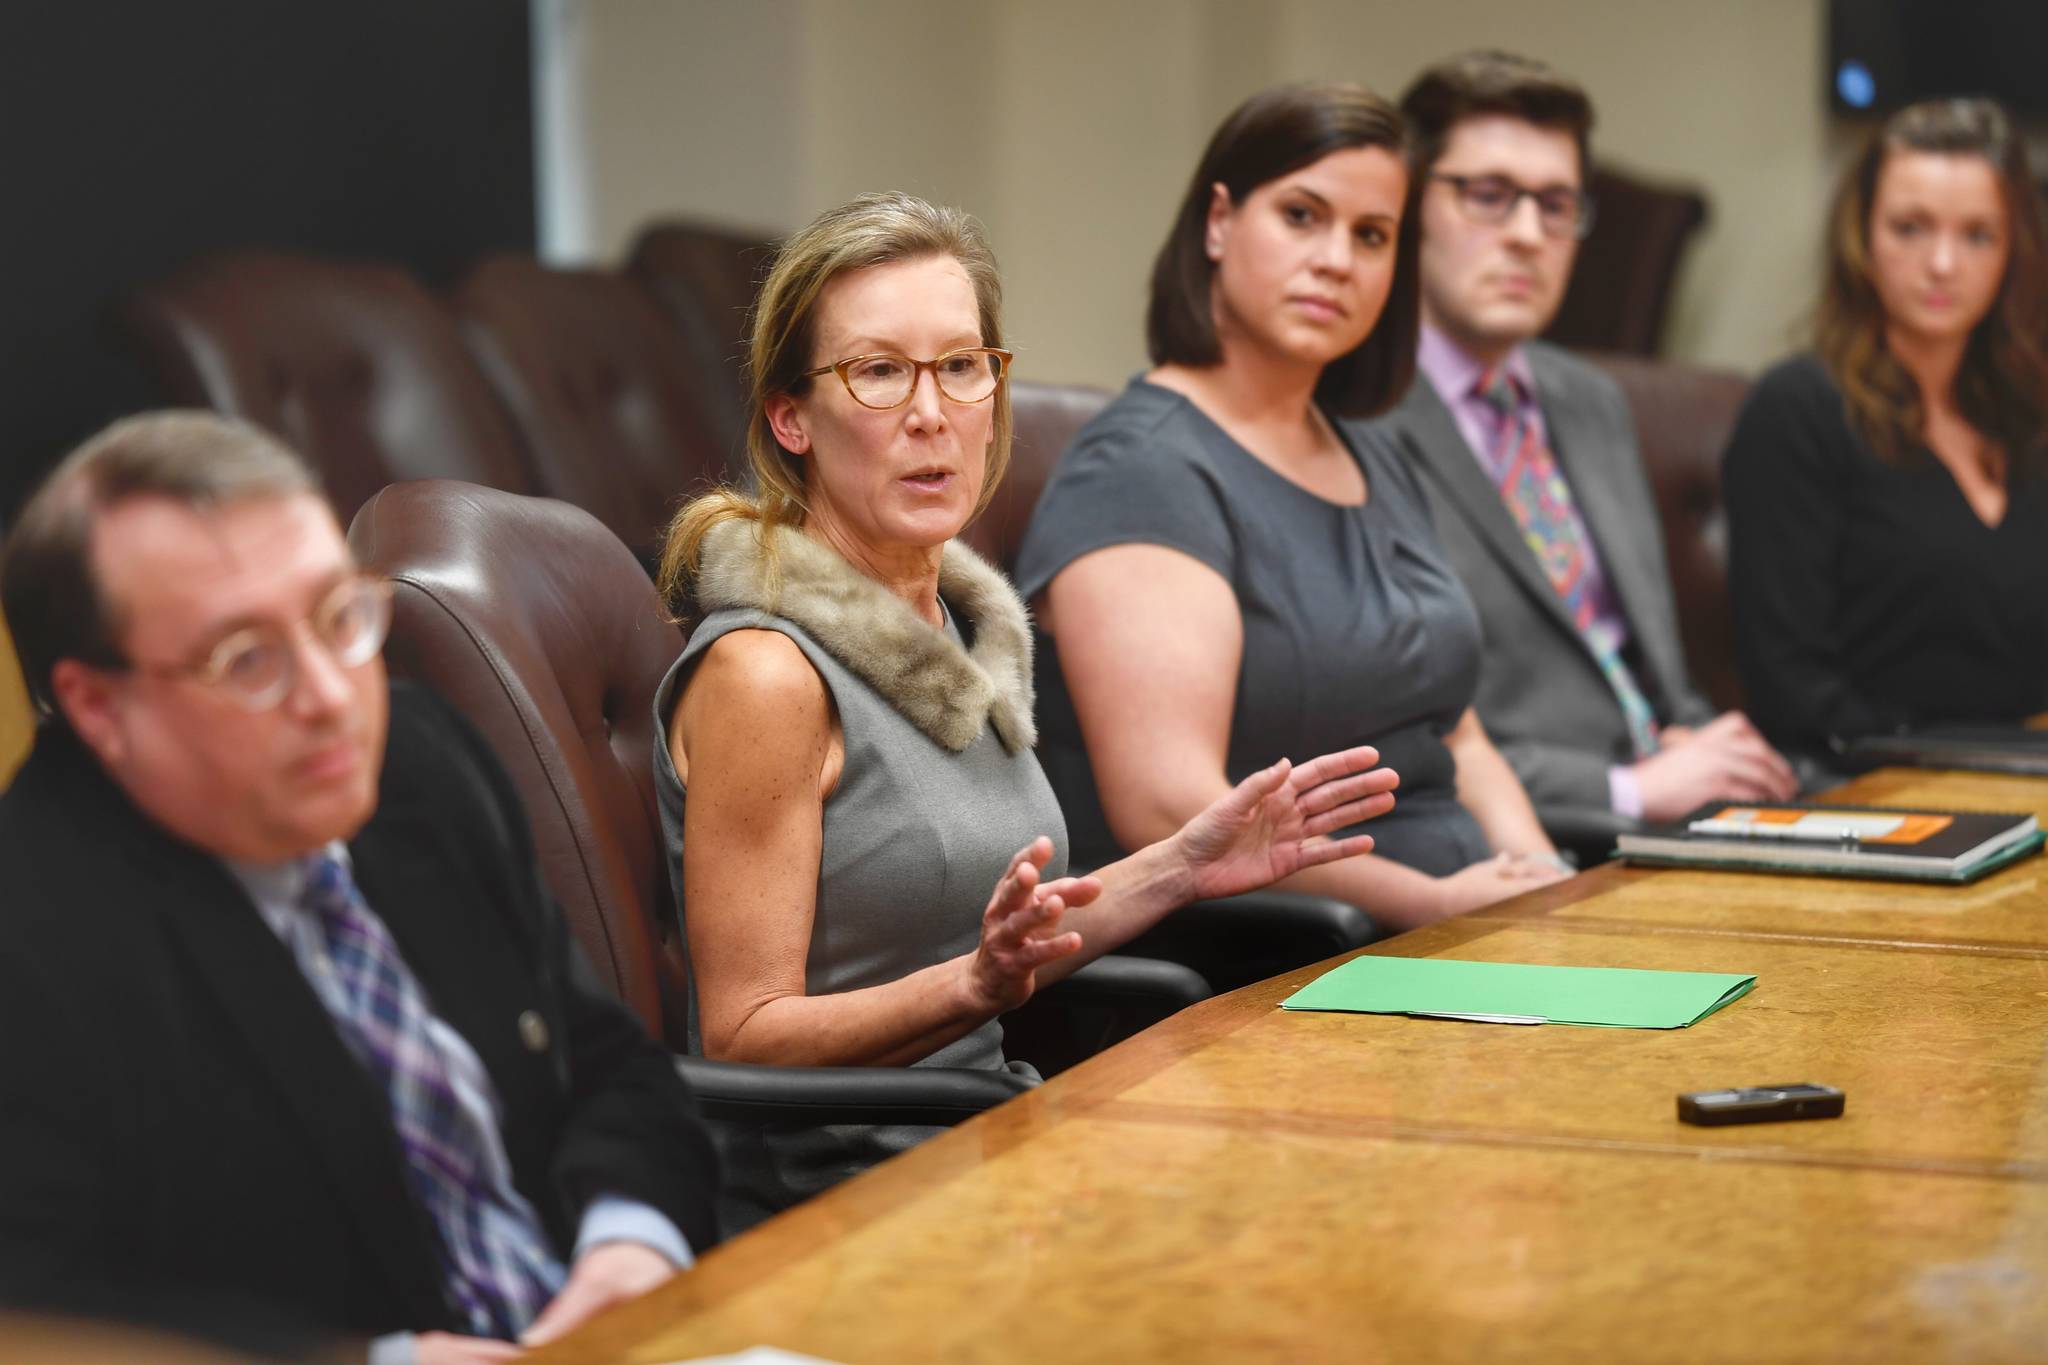 Office of Management and Budget Director Donna Arduin and members of her budget team takes time to explain Gov. Mike Dunleavy’s state budget at the Capitol on Wednesday, Feb. 13, 2019. (Michael Penn | Juneau Empire)